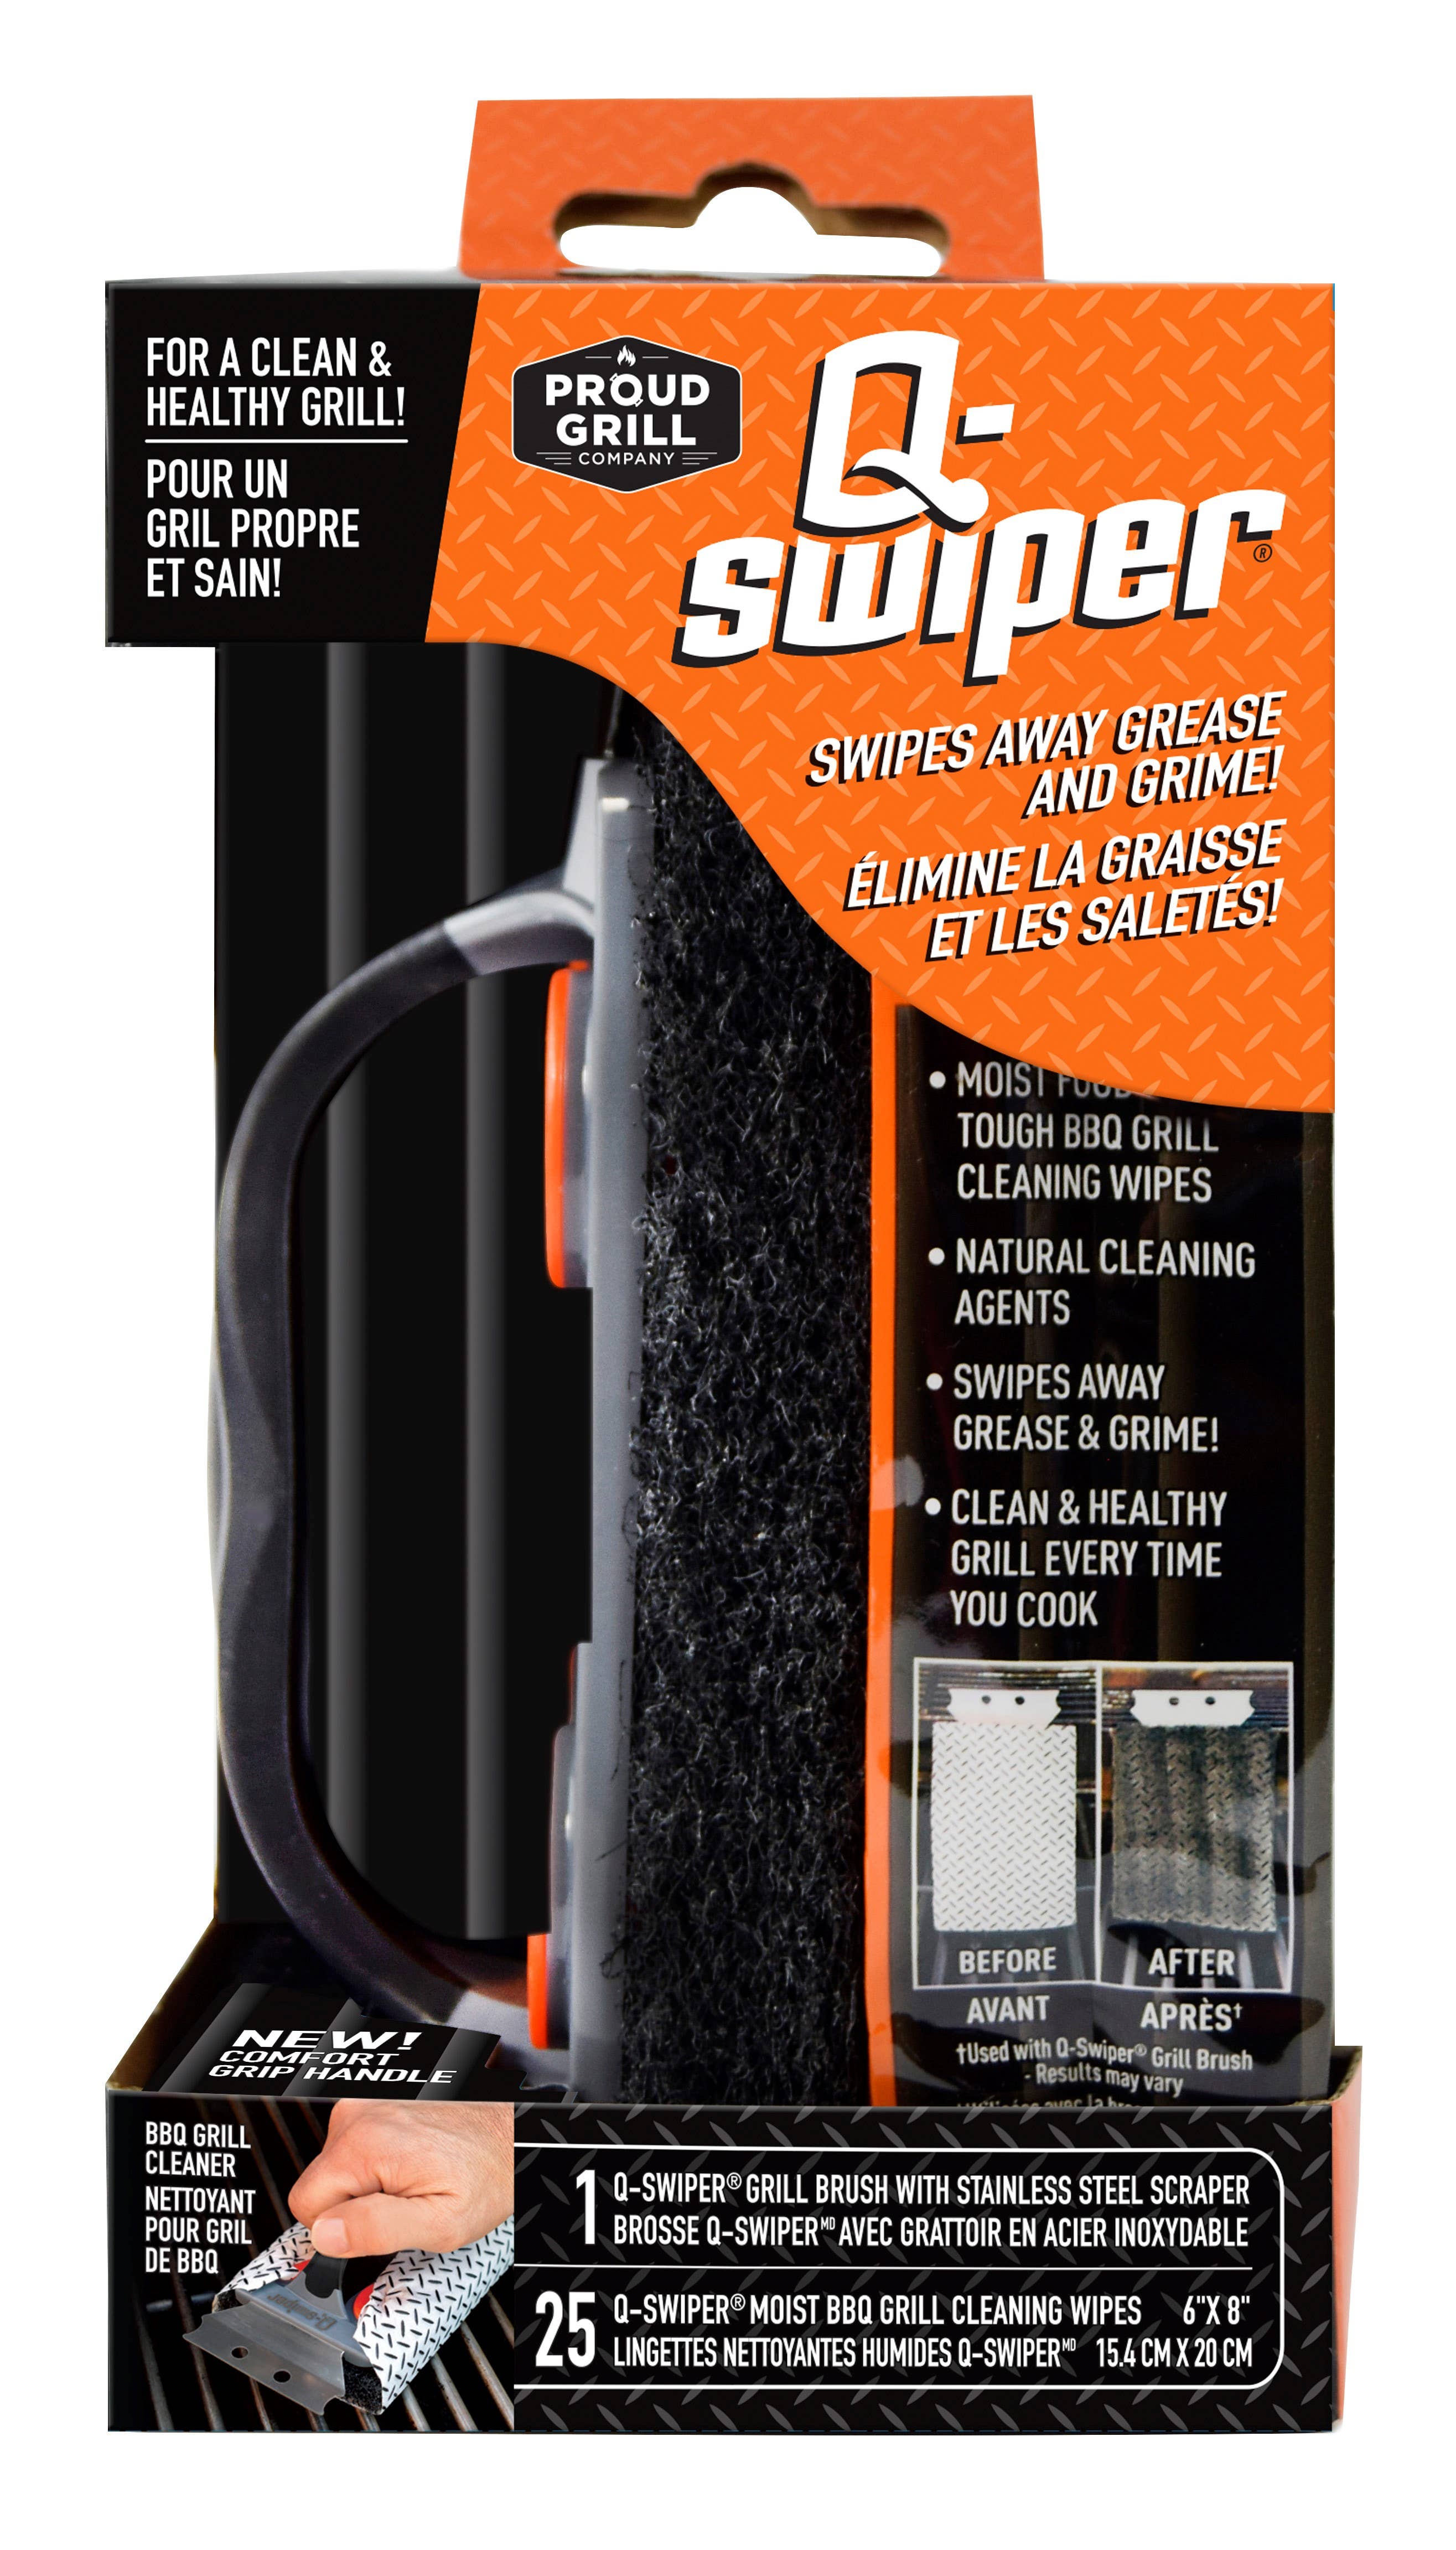 Q-Swiper BBQ Grill Cleaner Set - 1 Brush - 40 Cleaning Wipes - 2